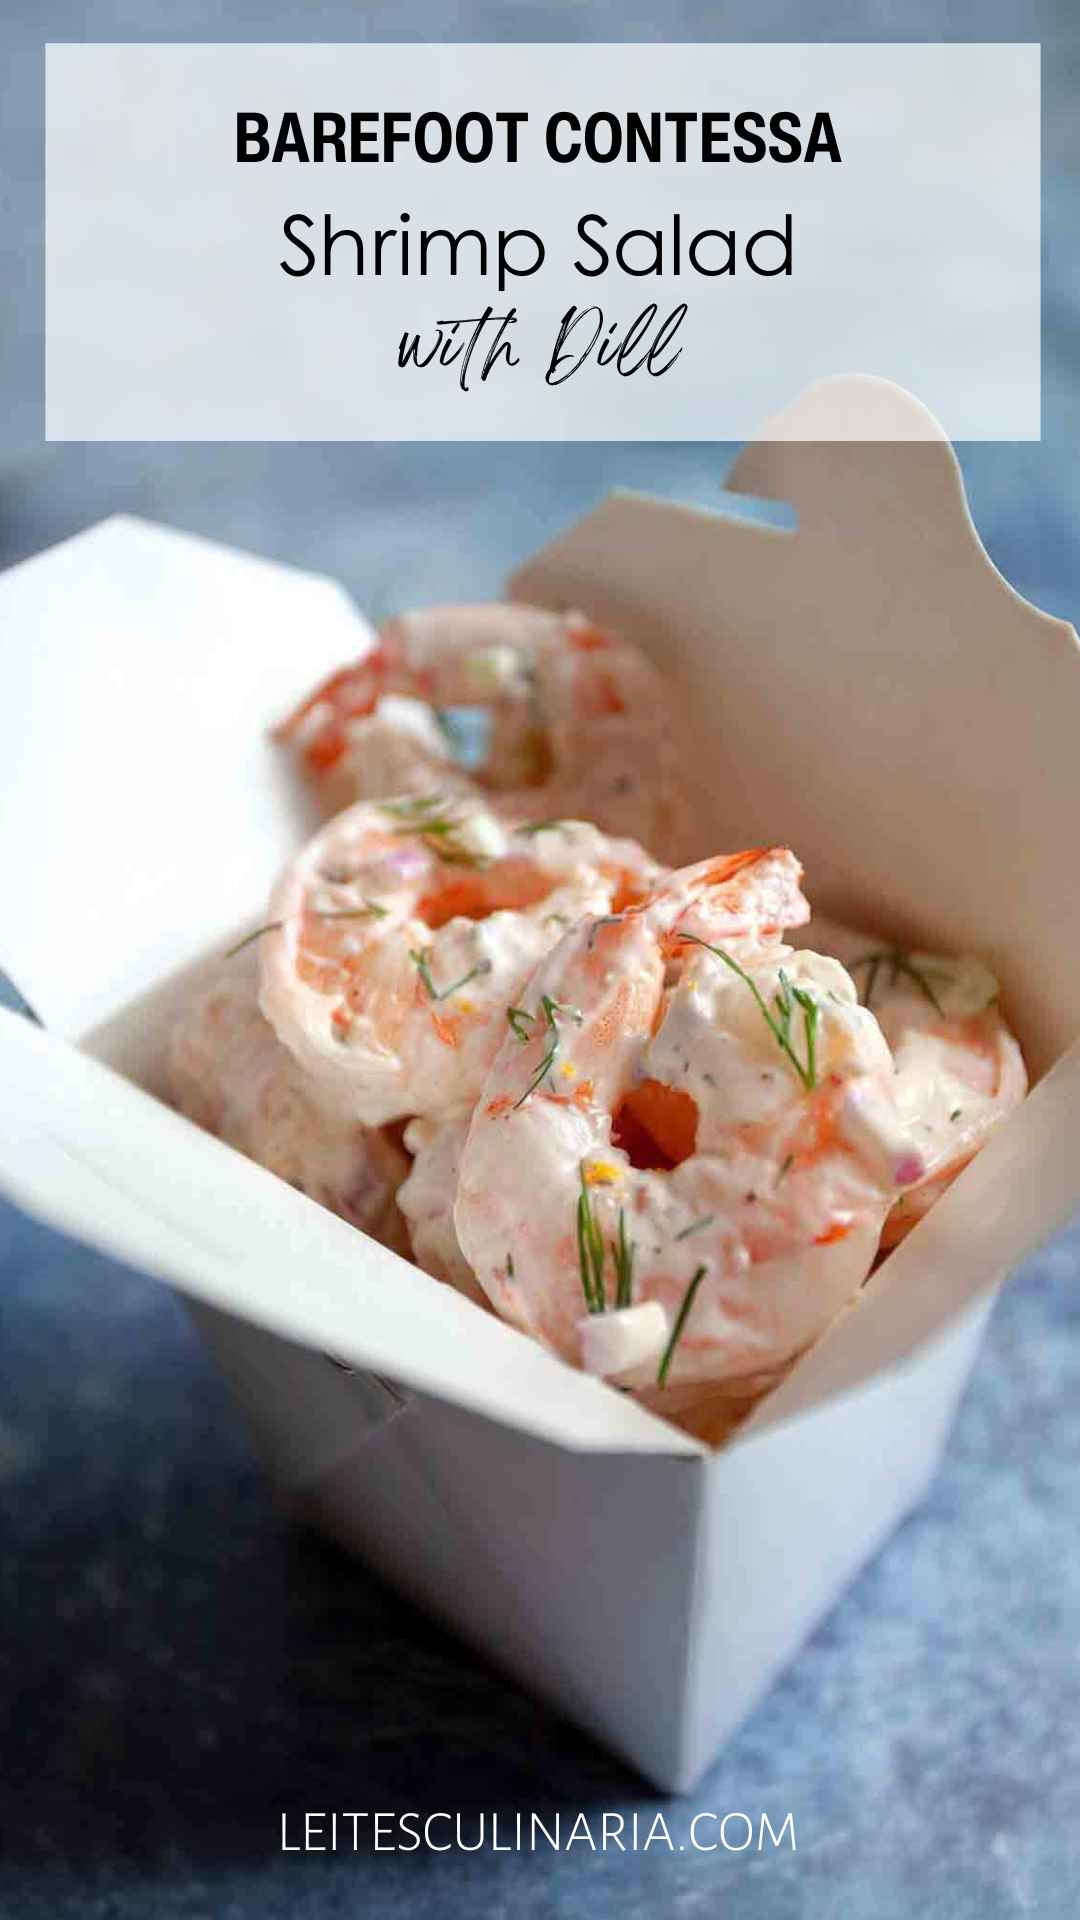 Creamy shrimp salad with fresh dill in a white takeout container.